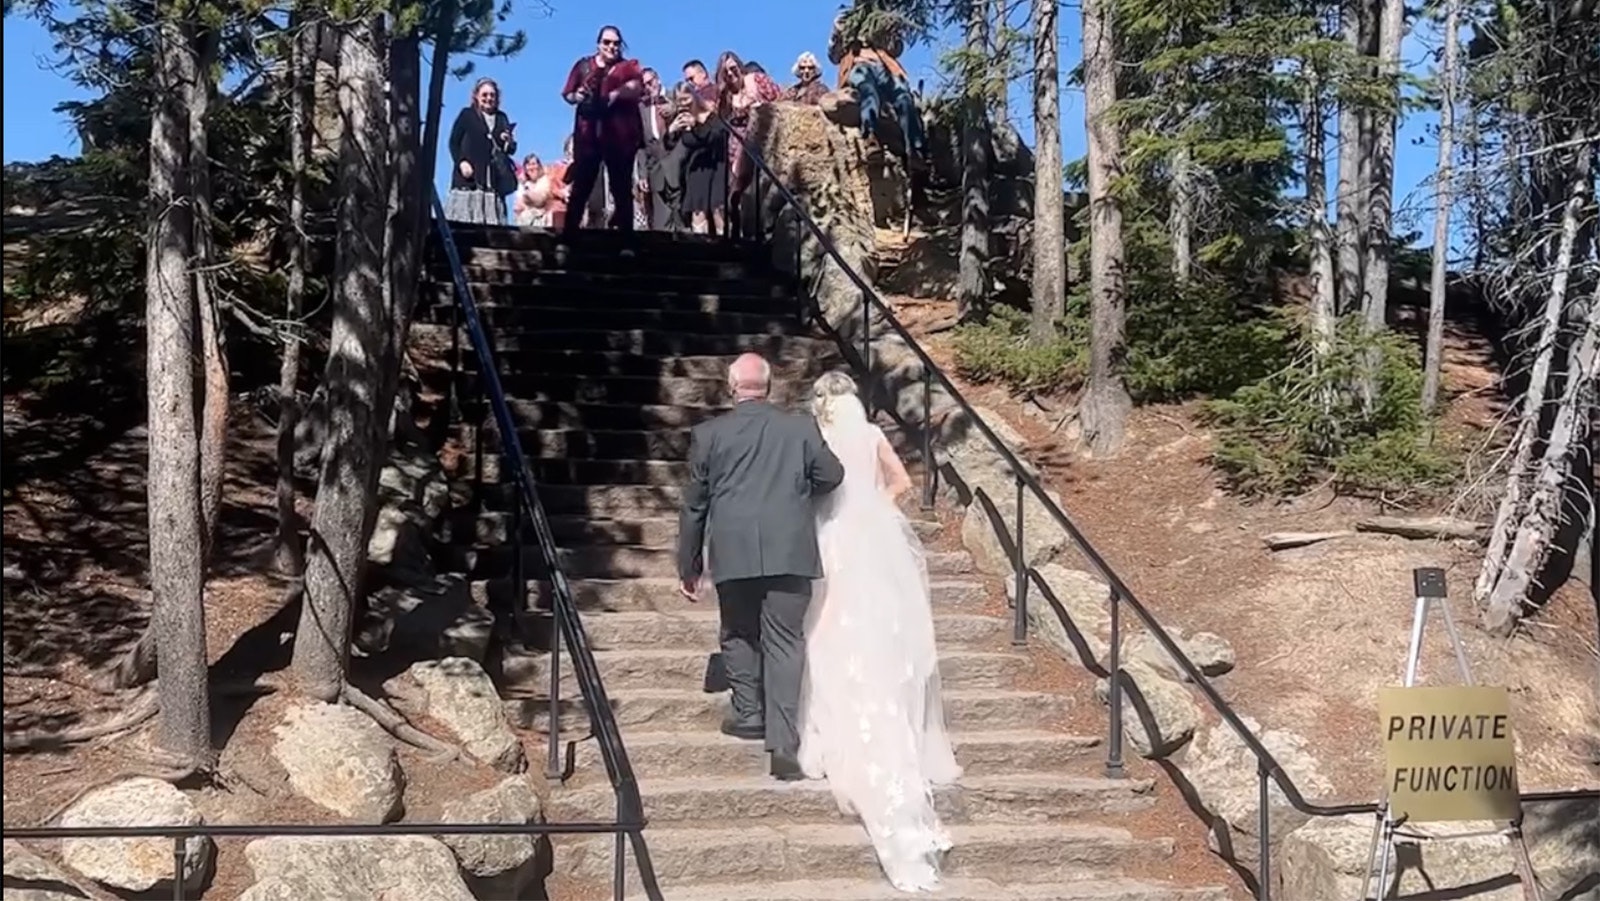 A "Private Function" sign at the stairs leading to Artist Point at the Lower Falls of the Grand Canyon of the Yellowstone is a message that, although it's a public place, the wedding party wants the space all to themselves.